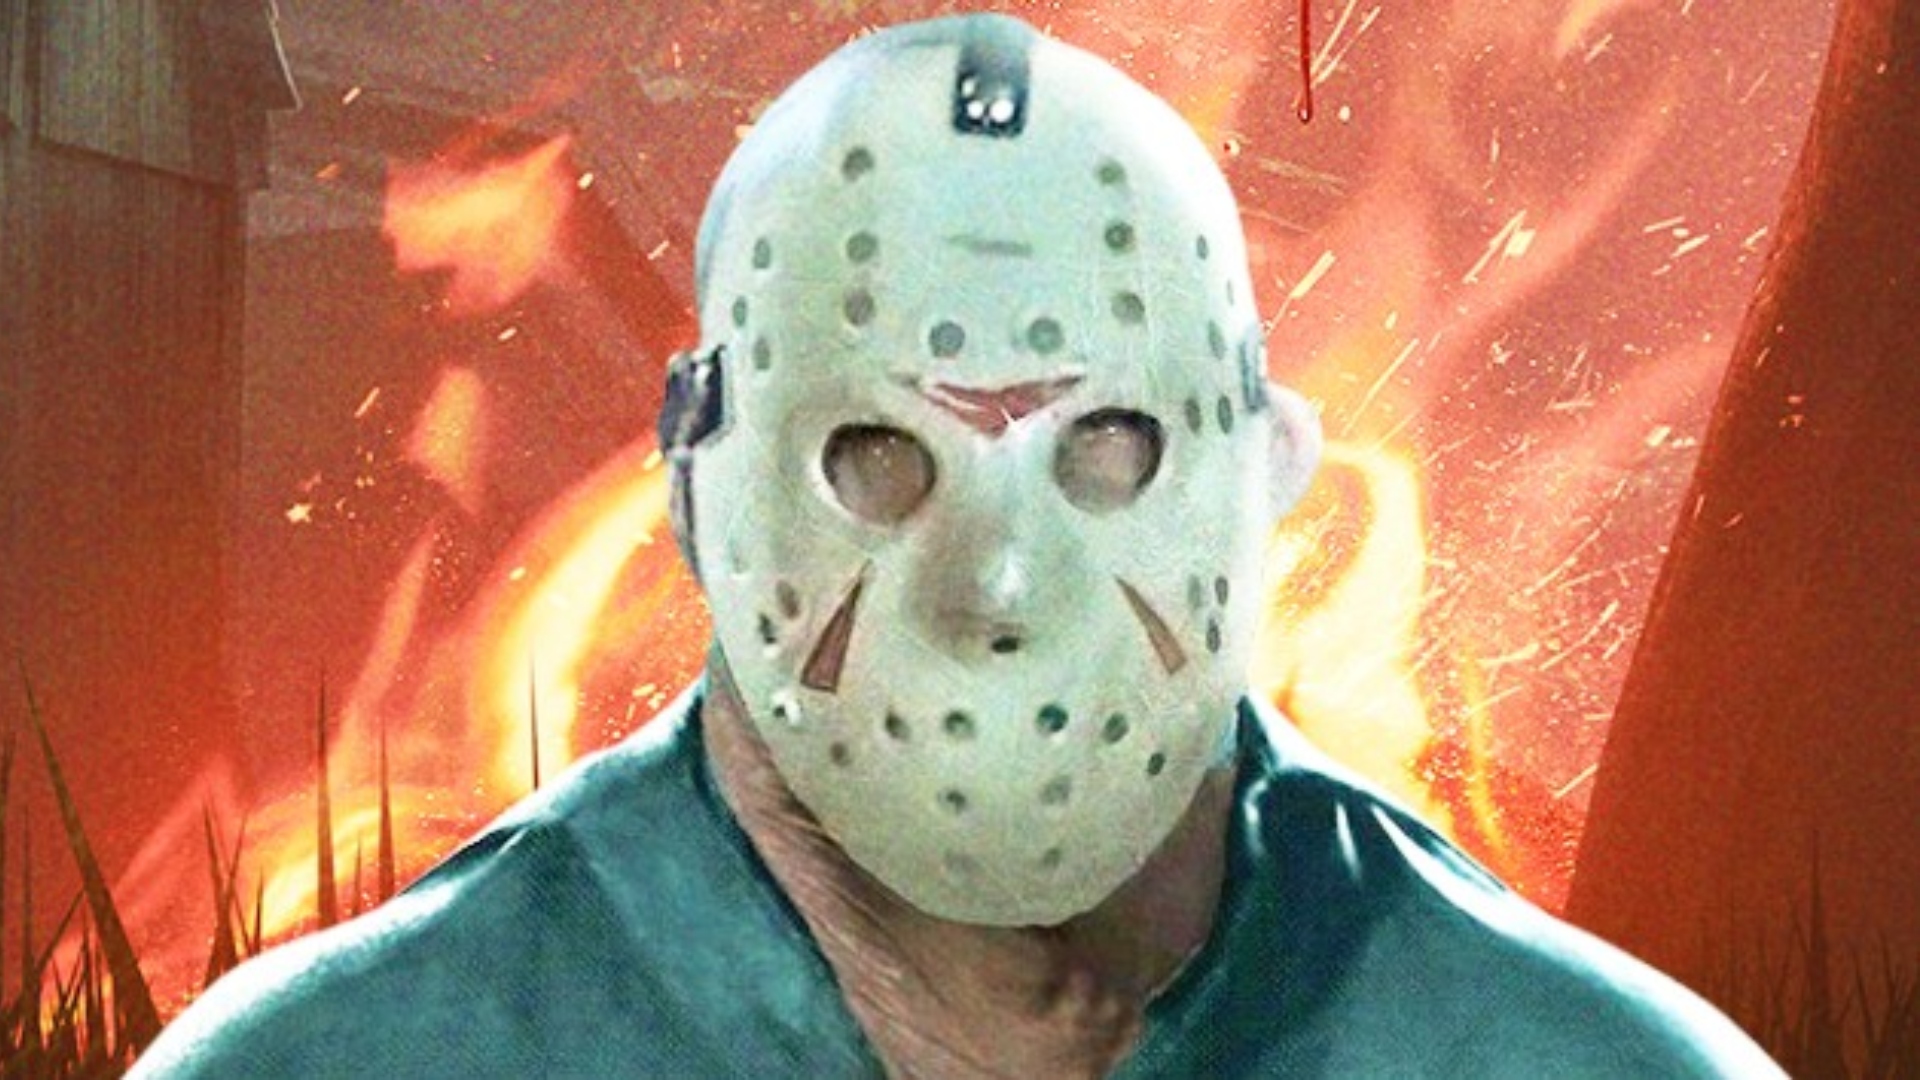 Friday the 13th isn't returning after all as fan remake gets shut down